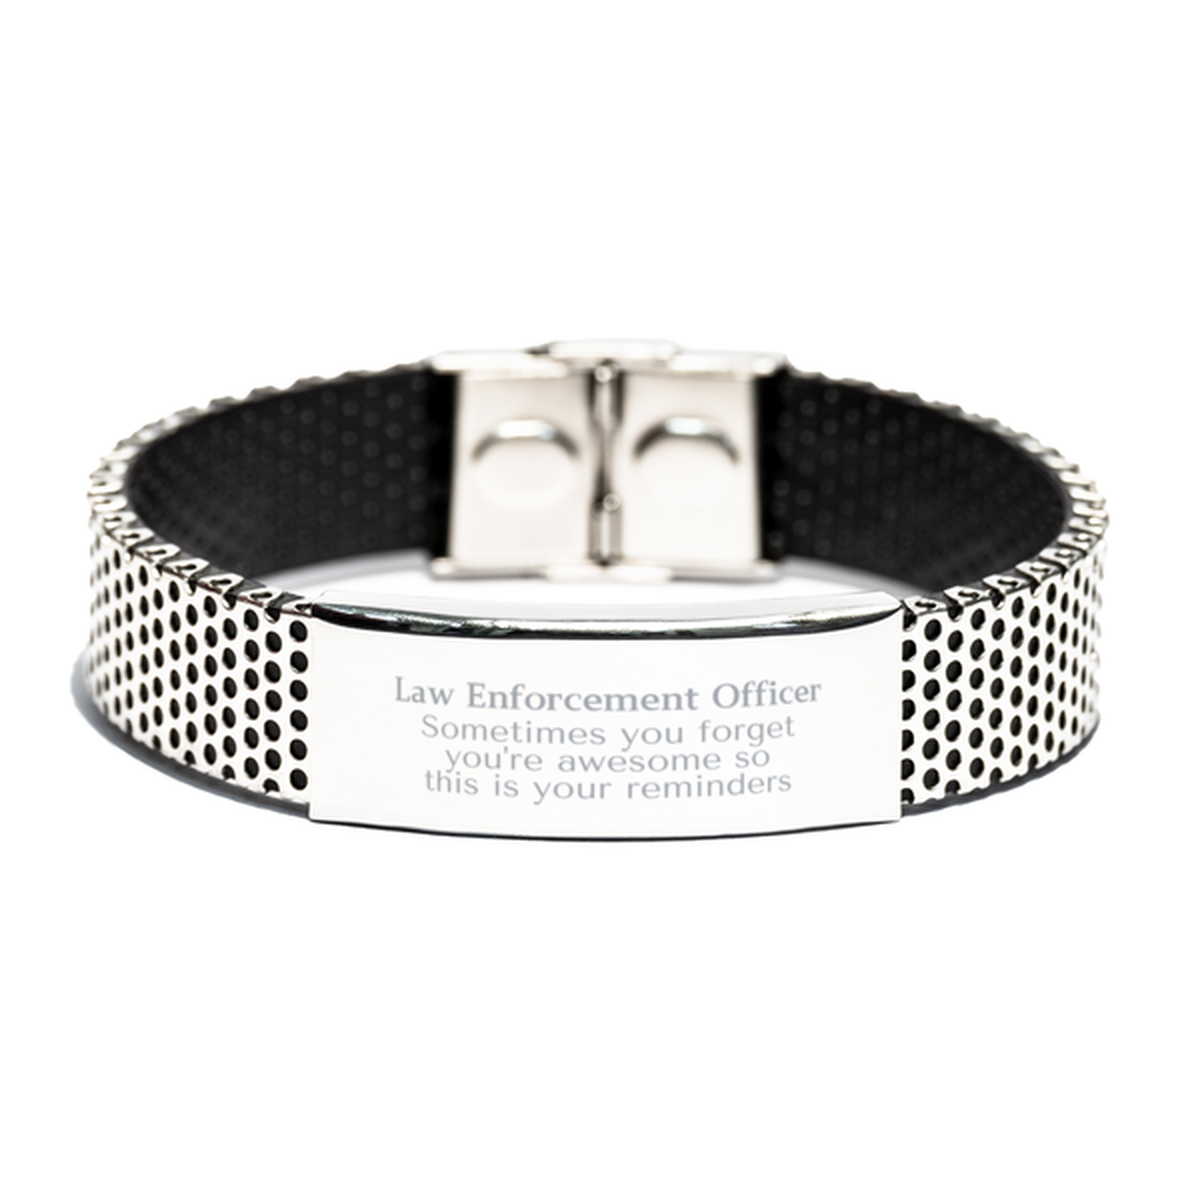 Sentimental Law Enforcement Officer Stainless Steel Bracelet, Law Enforcement Officer Sometimes you forget you're awesome so this is your reminders, Graduation Christmas Birthday Gifts for Law Enforcement Officer, Men, Women, Coworkers